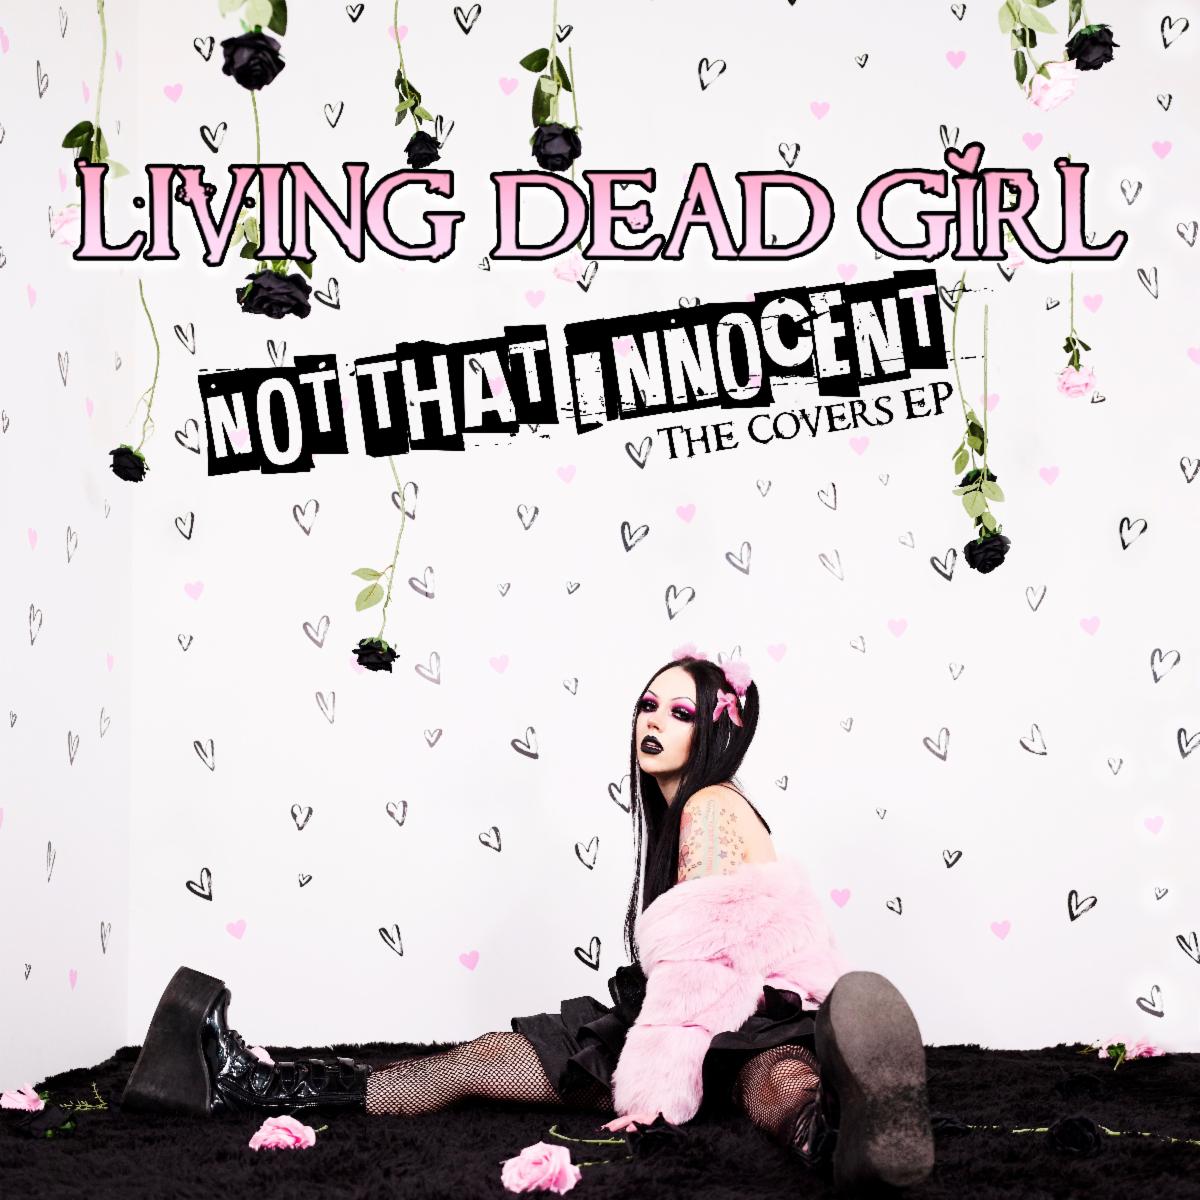 LIVING DEAD GIRL Drops New EP This Friday - Announces Tour